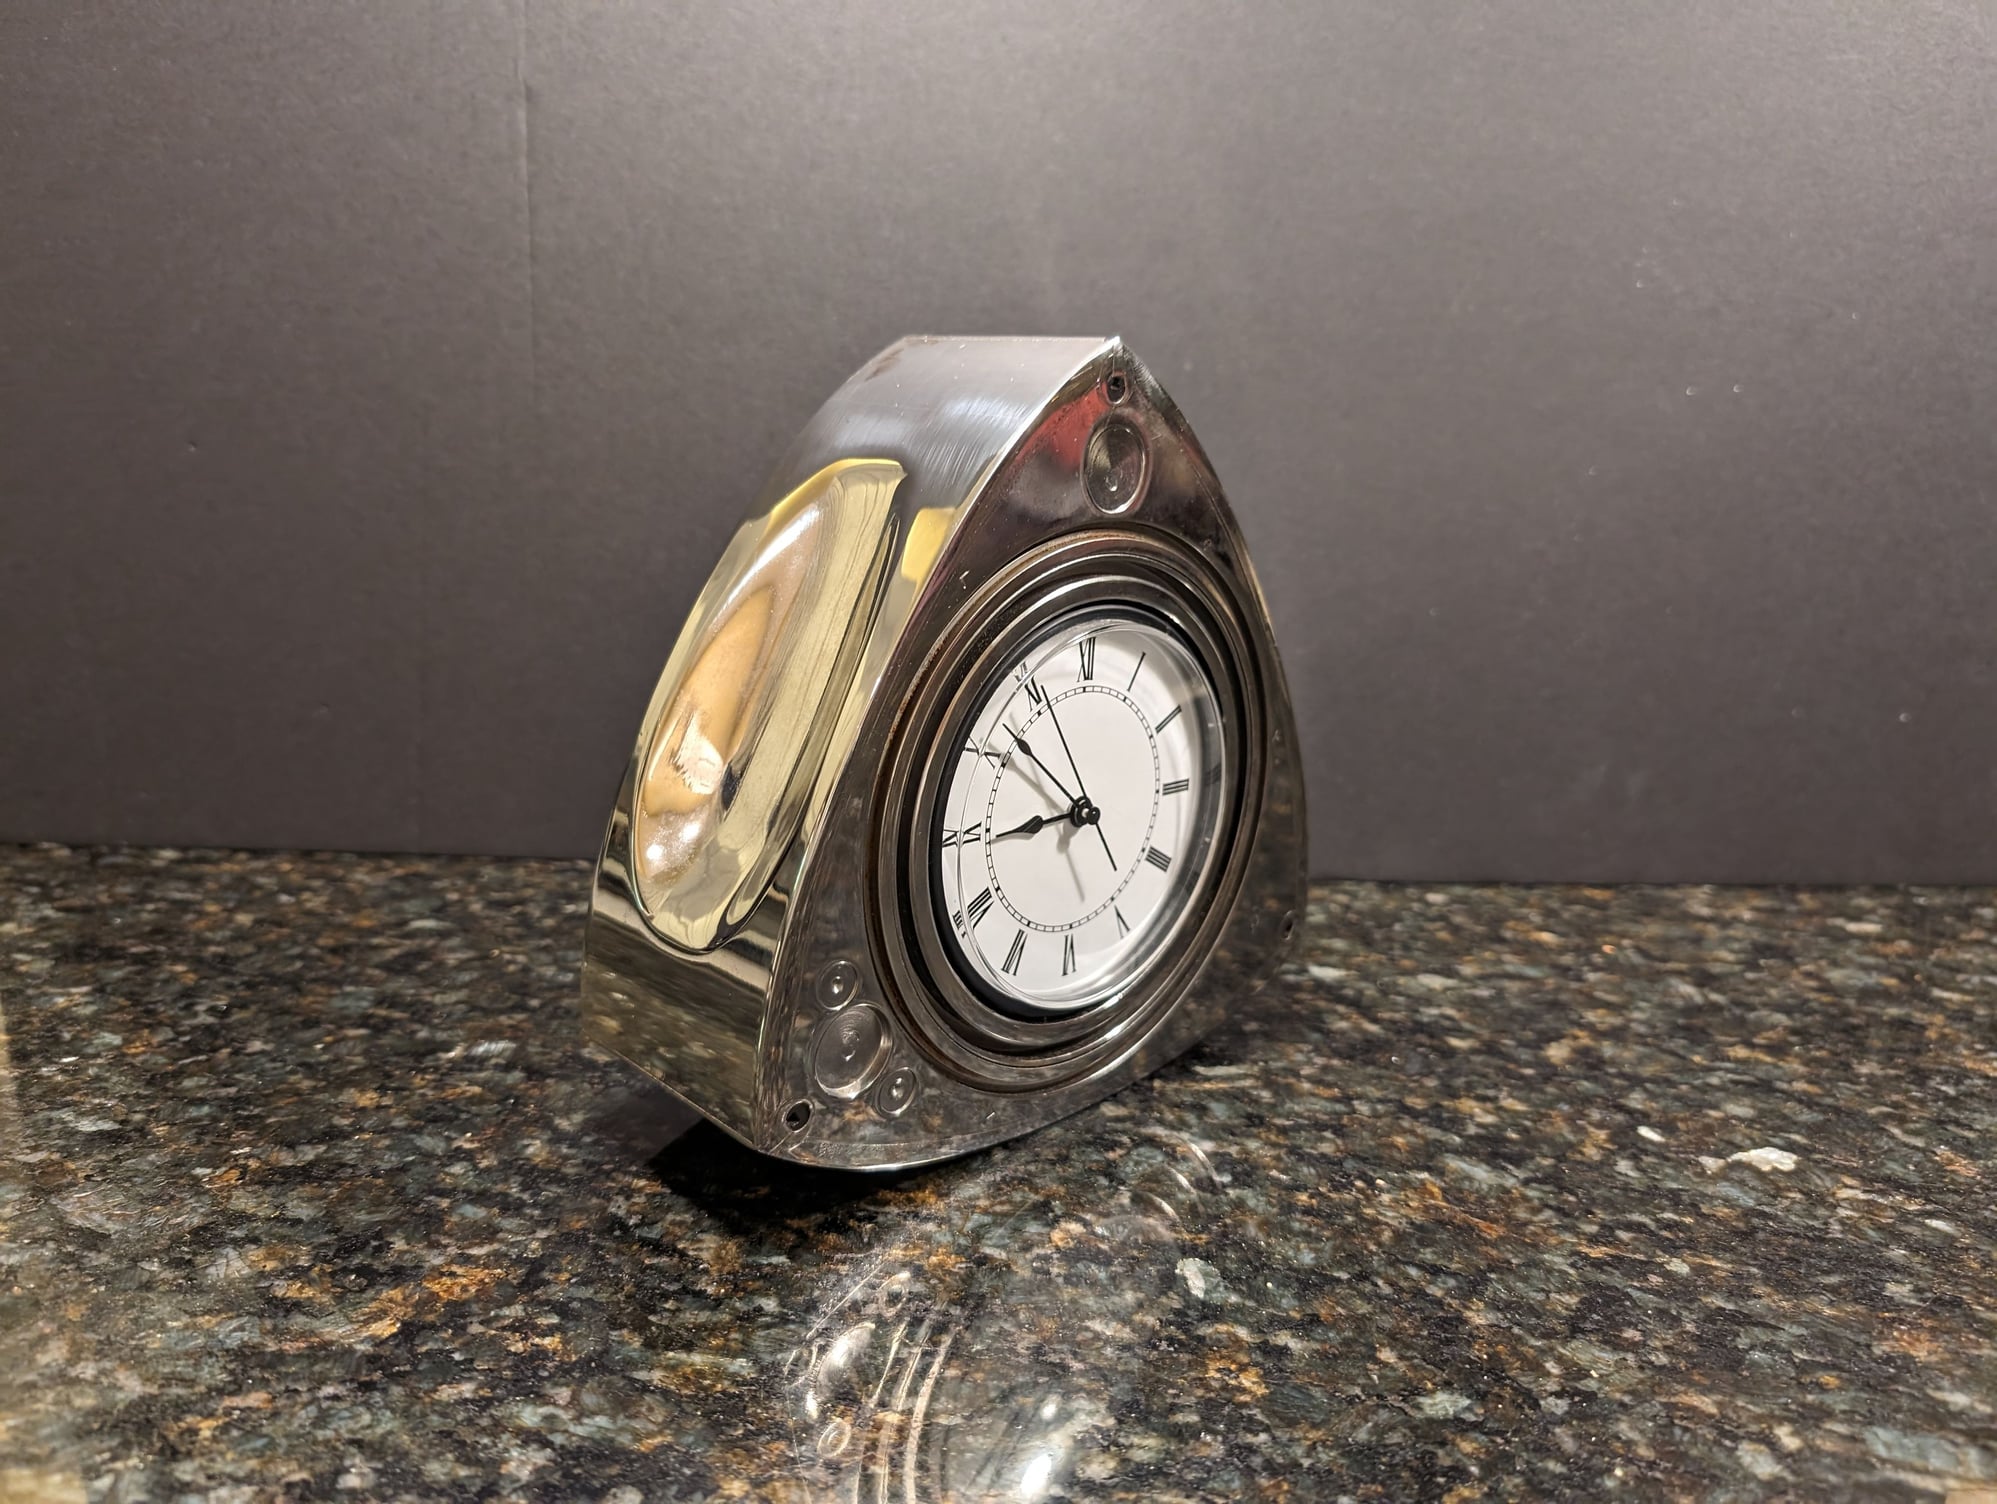 Miscellaneous - Rotary clock - Used - 0  All Models - West Chester, PA 19382, United States